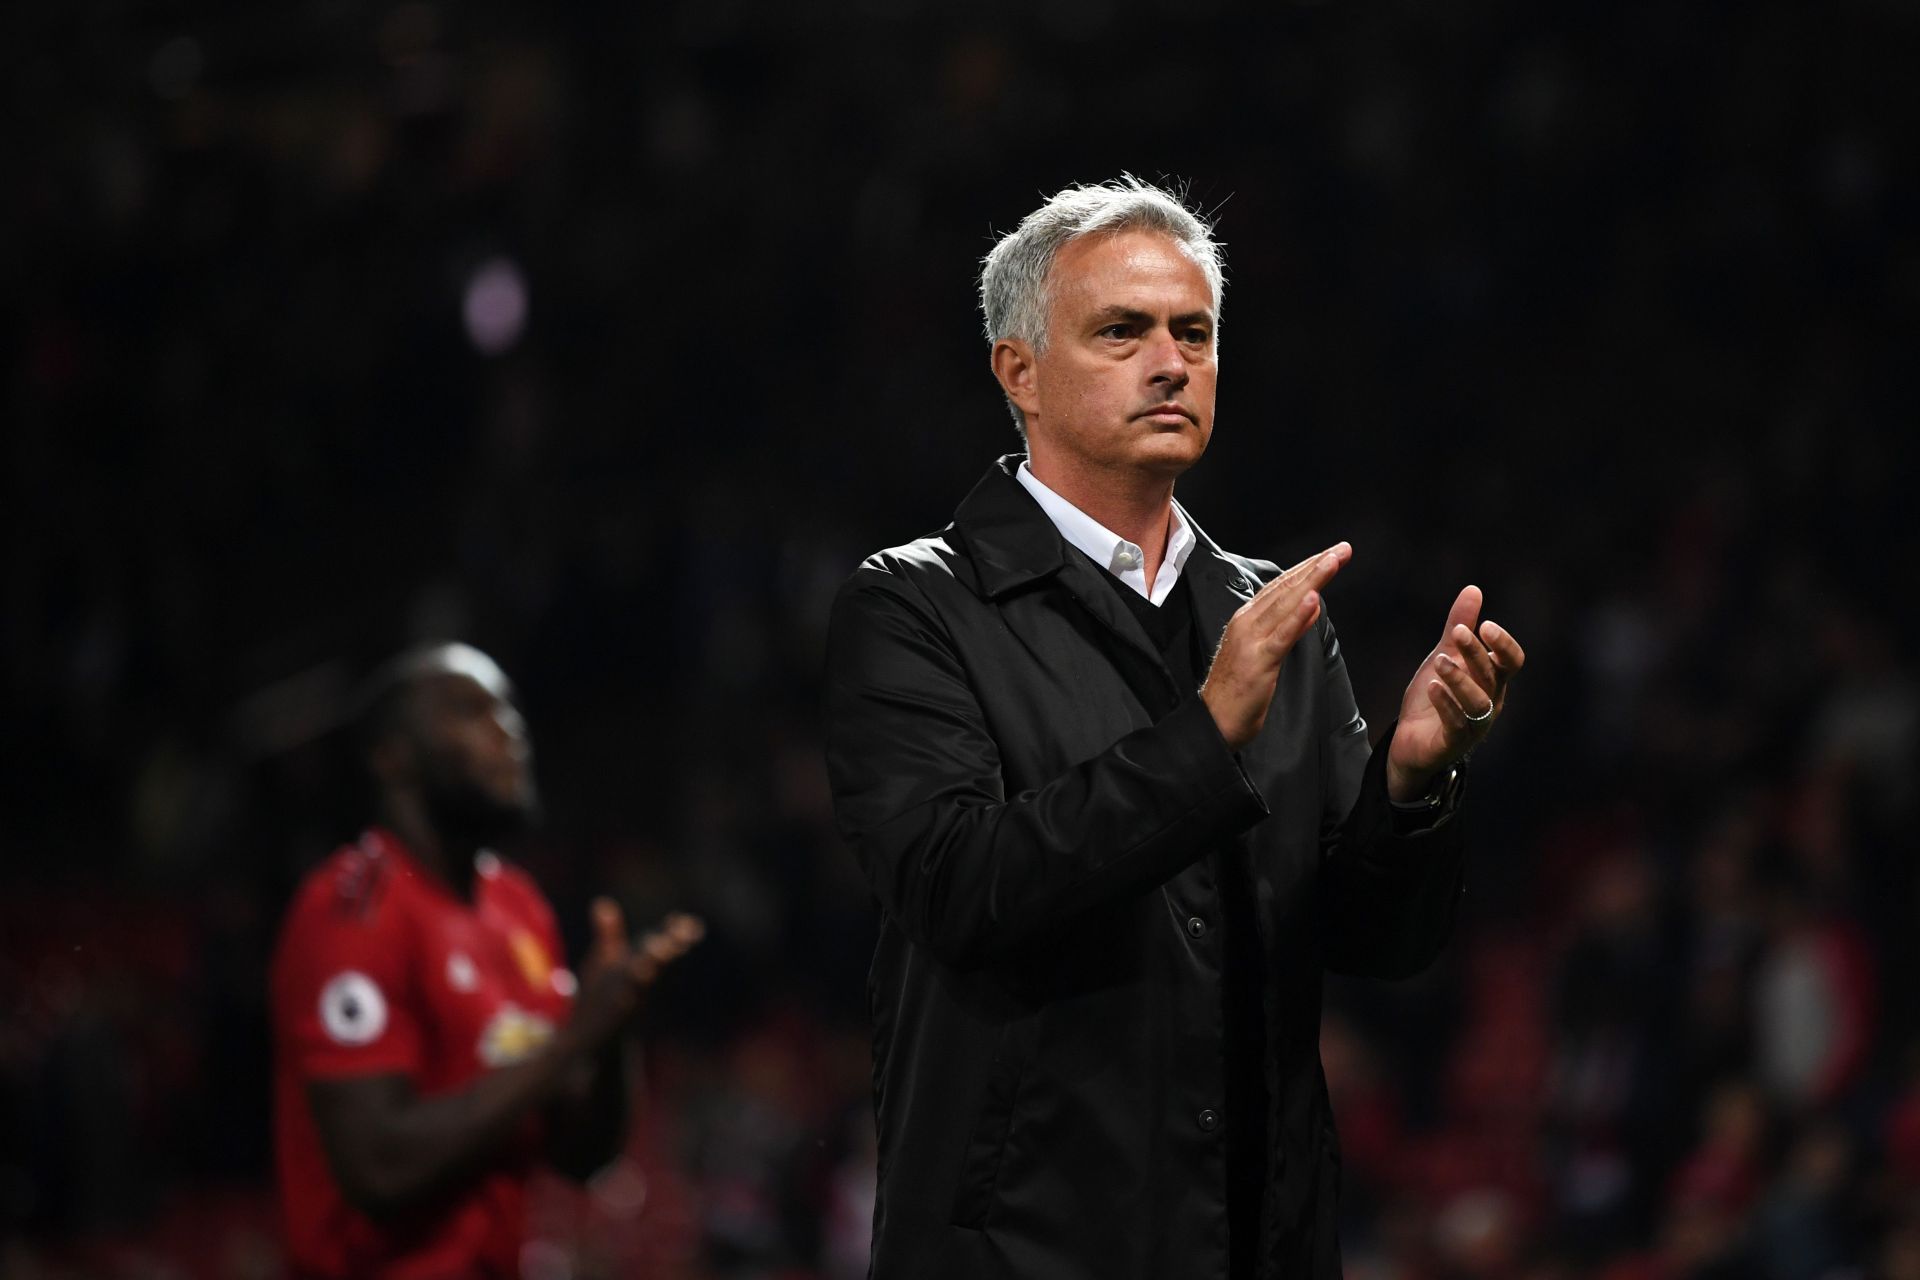 Jose Mourinho was expected to achieve big things at Manchester United